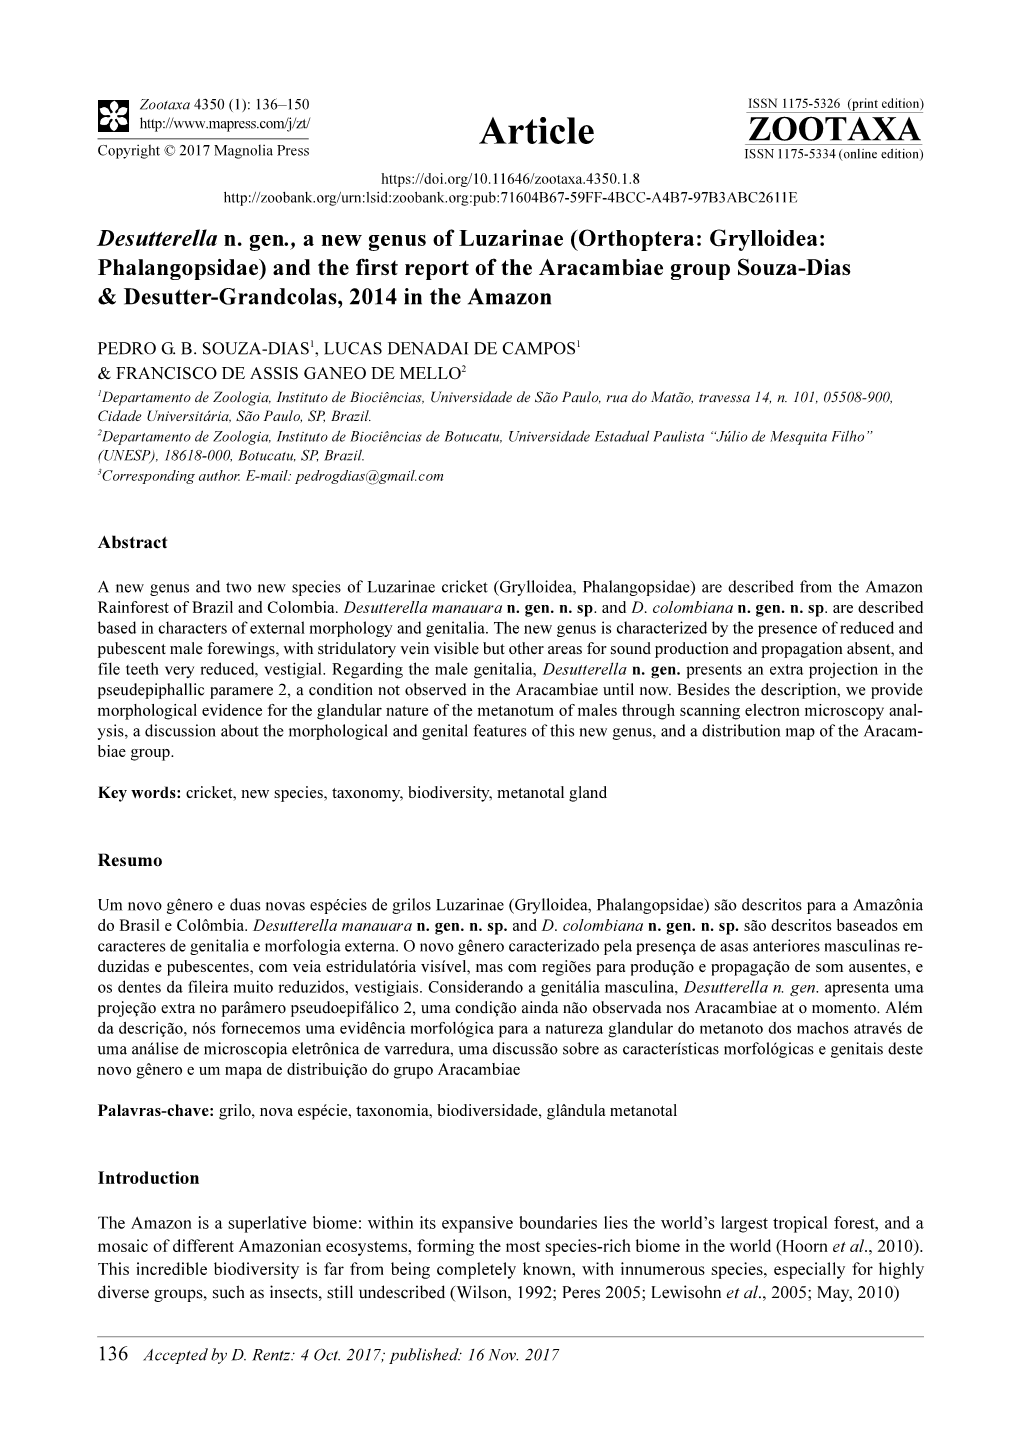 Orthoptera: Grylloidea: Phalangopsidae) and the First Report of the Aracambiae Group Souza-Dias & Desutter-Grandcolas, 2014 in the Amazon